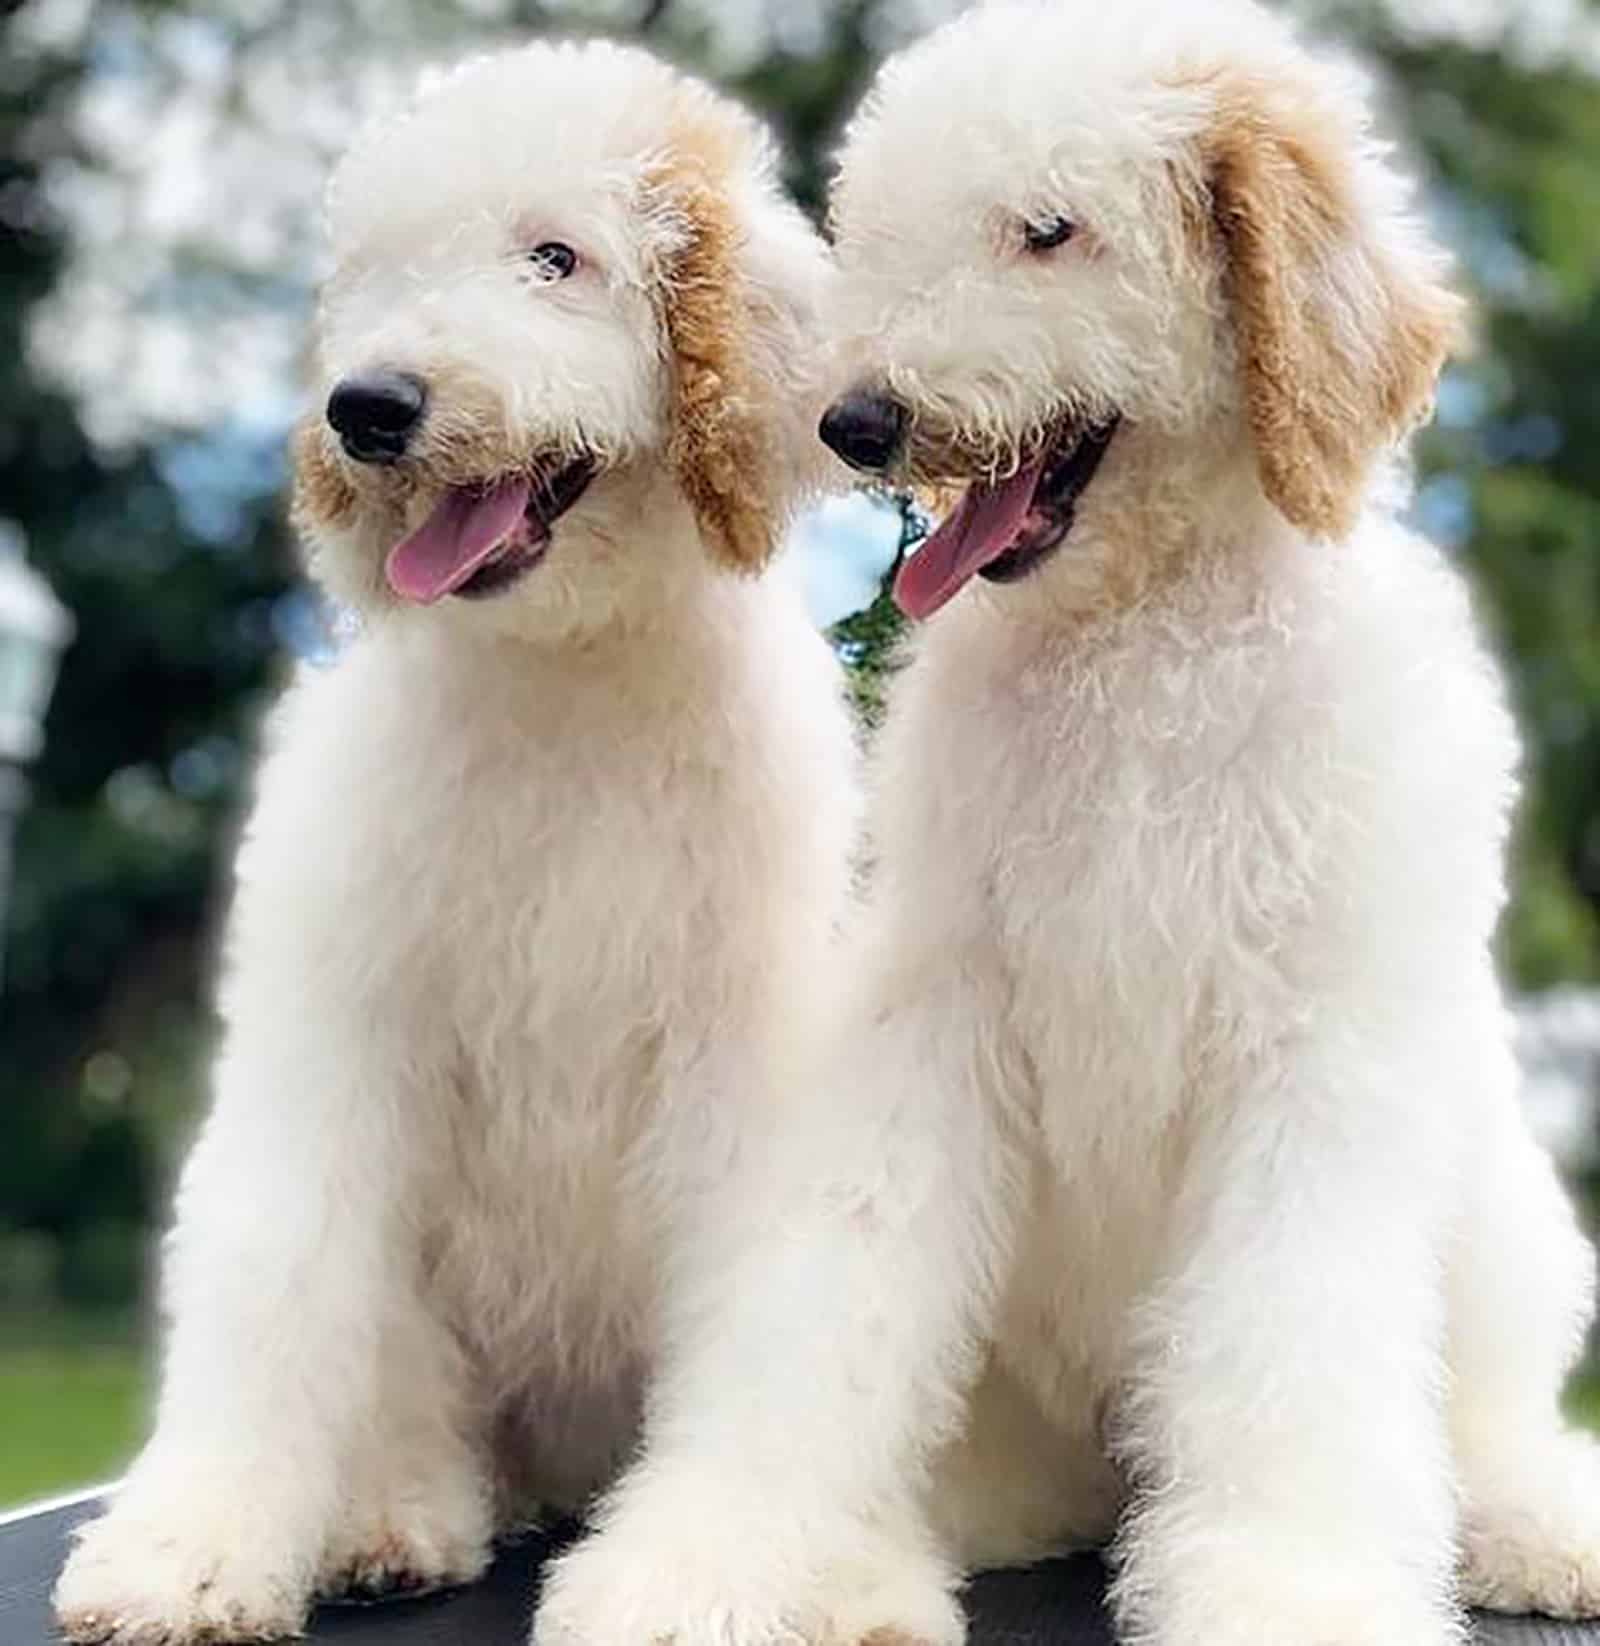 two white giant poodles sitting together